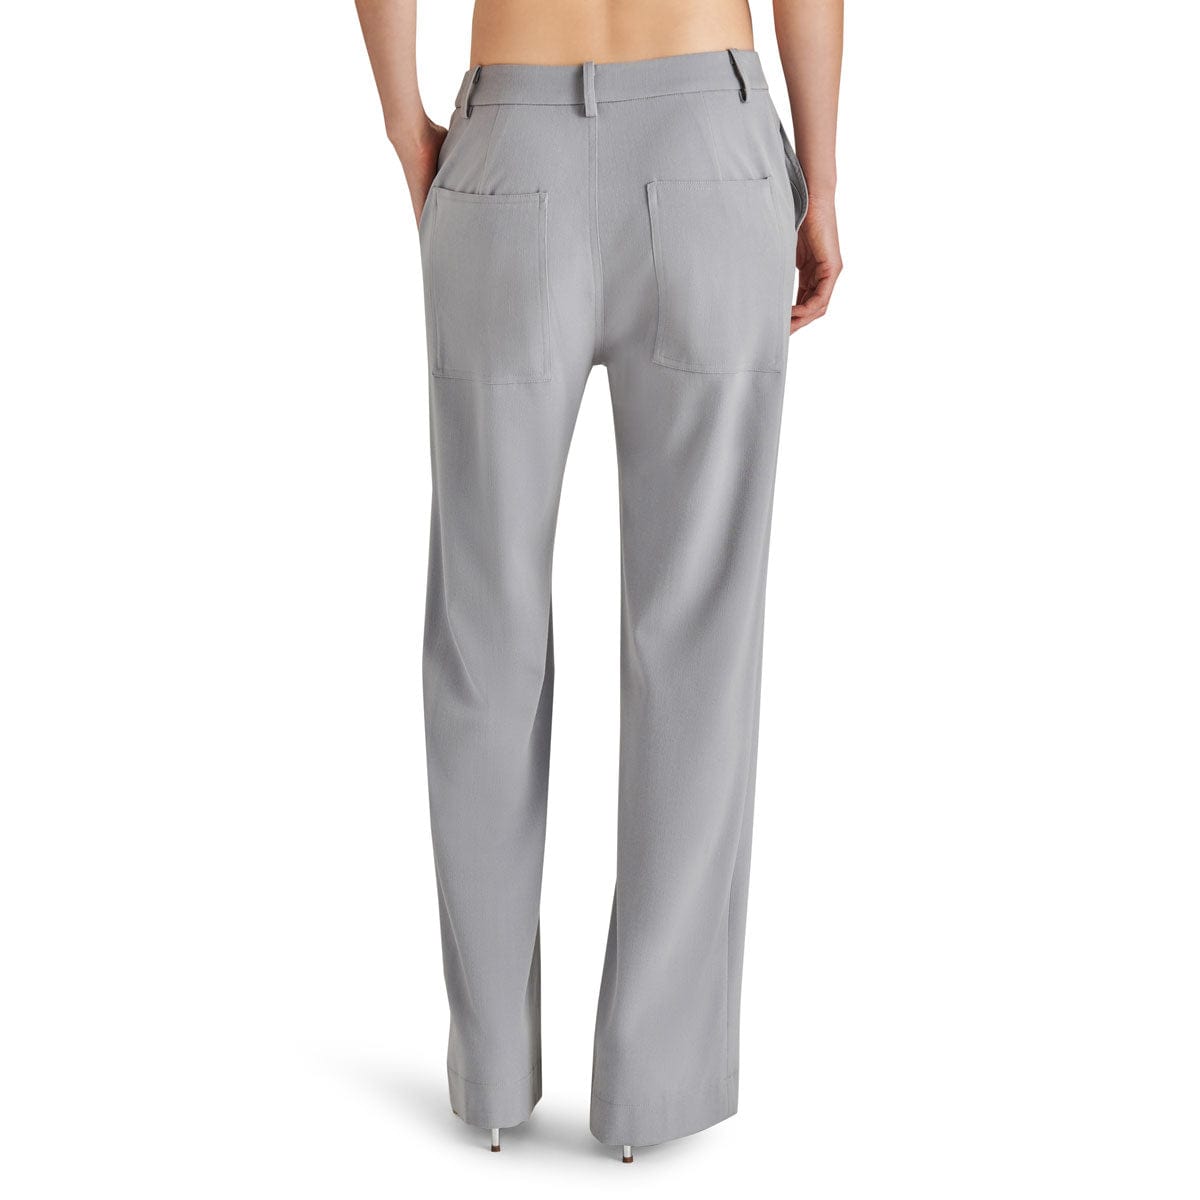 Steve Madden Devin Bootcut Pants steel grey back  | MILK MONEY milkmoney.co | cute clothes for women. womens online clothing. trendy online clothing stores. womens casual clothing online. trendy clothes online. trendy women's clothing online. ladies online clothing stores. trendy women's clothing stores. cute female clothes.